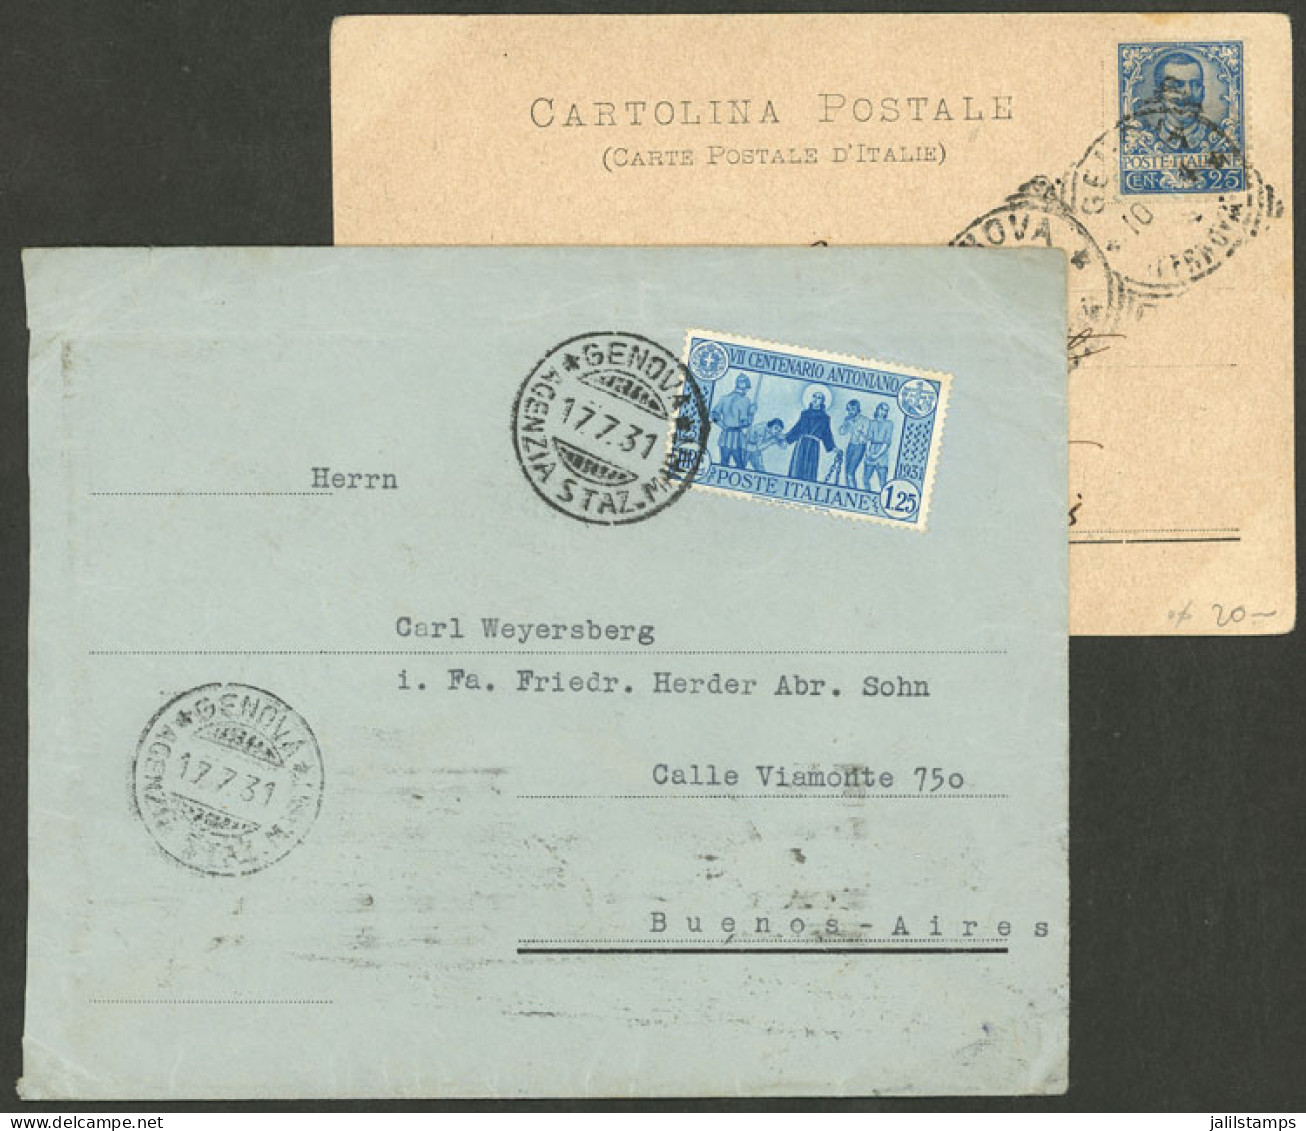 ITALY: Postcard Sent From Genova To Paris In 1904 + Cover To Argentina In 1931, VF! - Unclassified